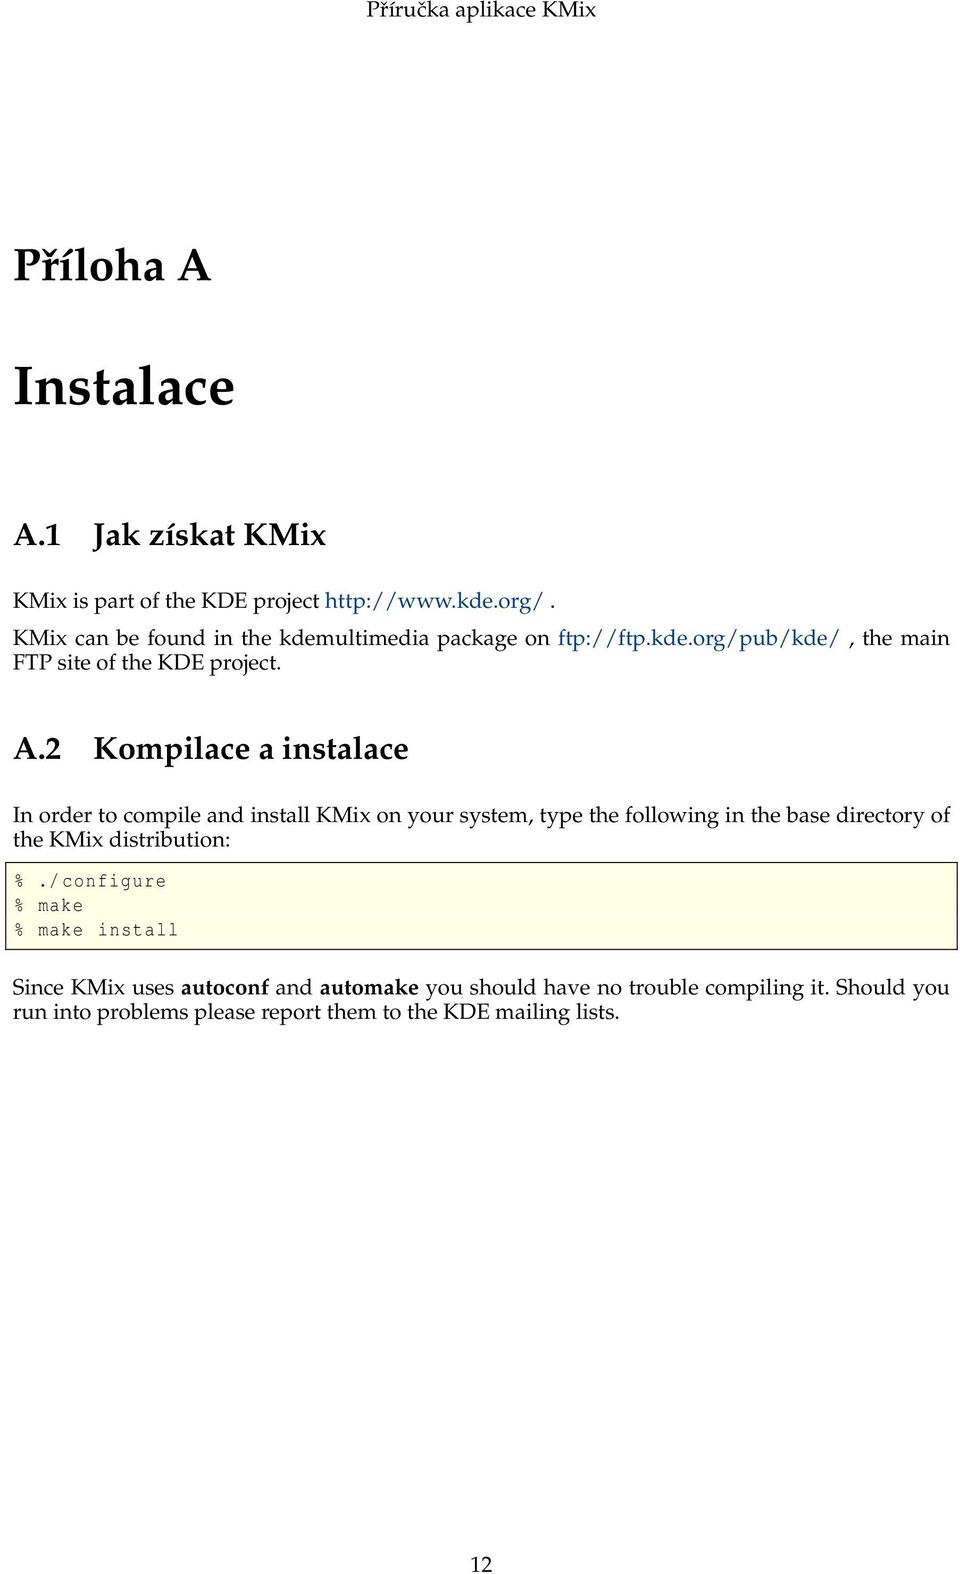 2 Kompilace a instalace In order to compile and install KMix on your system, type the following in the base directory of the KMix